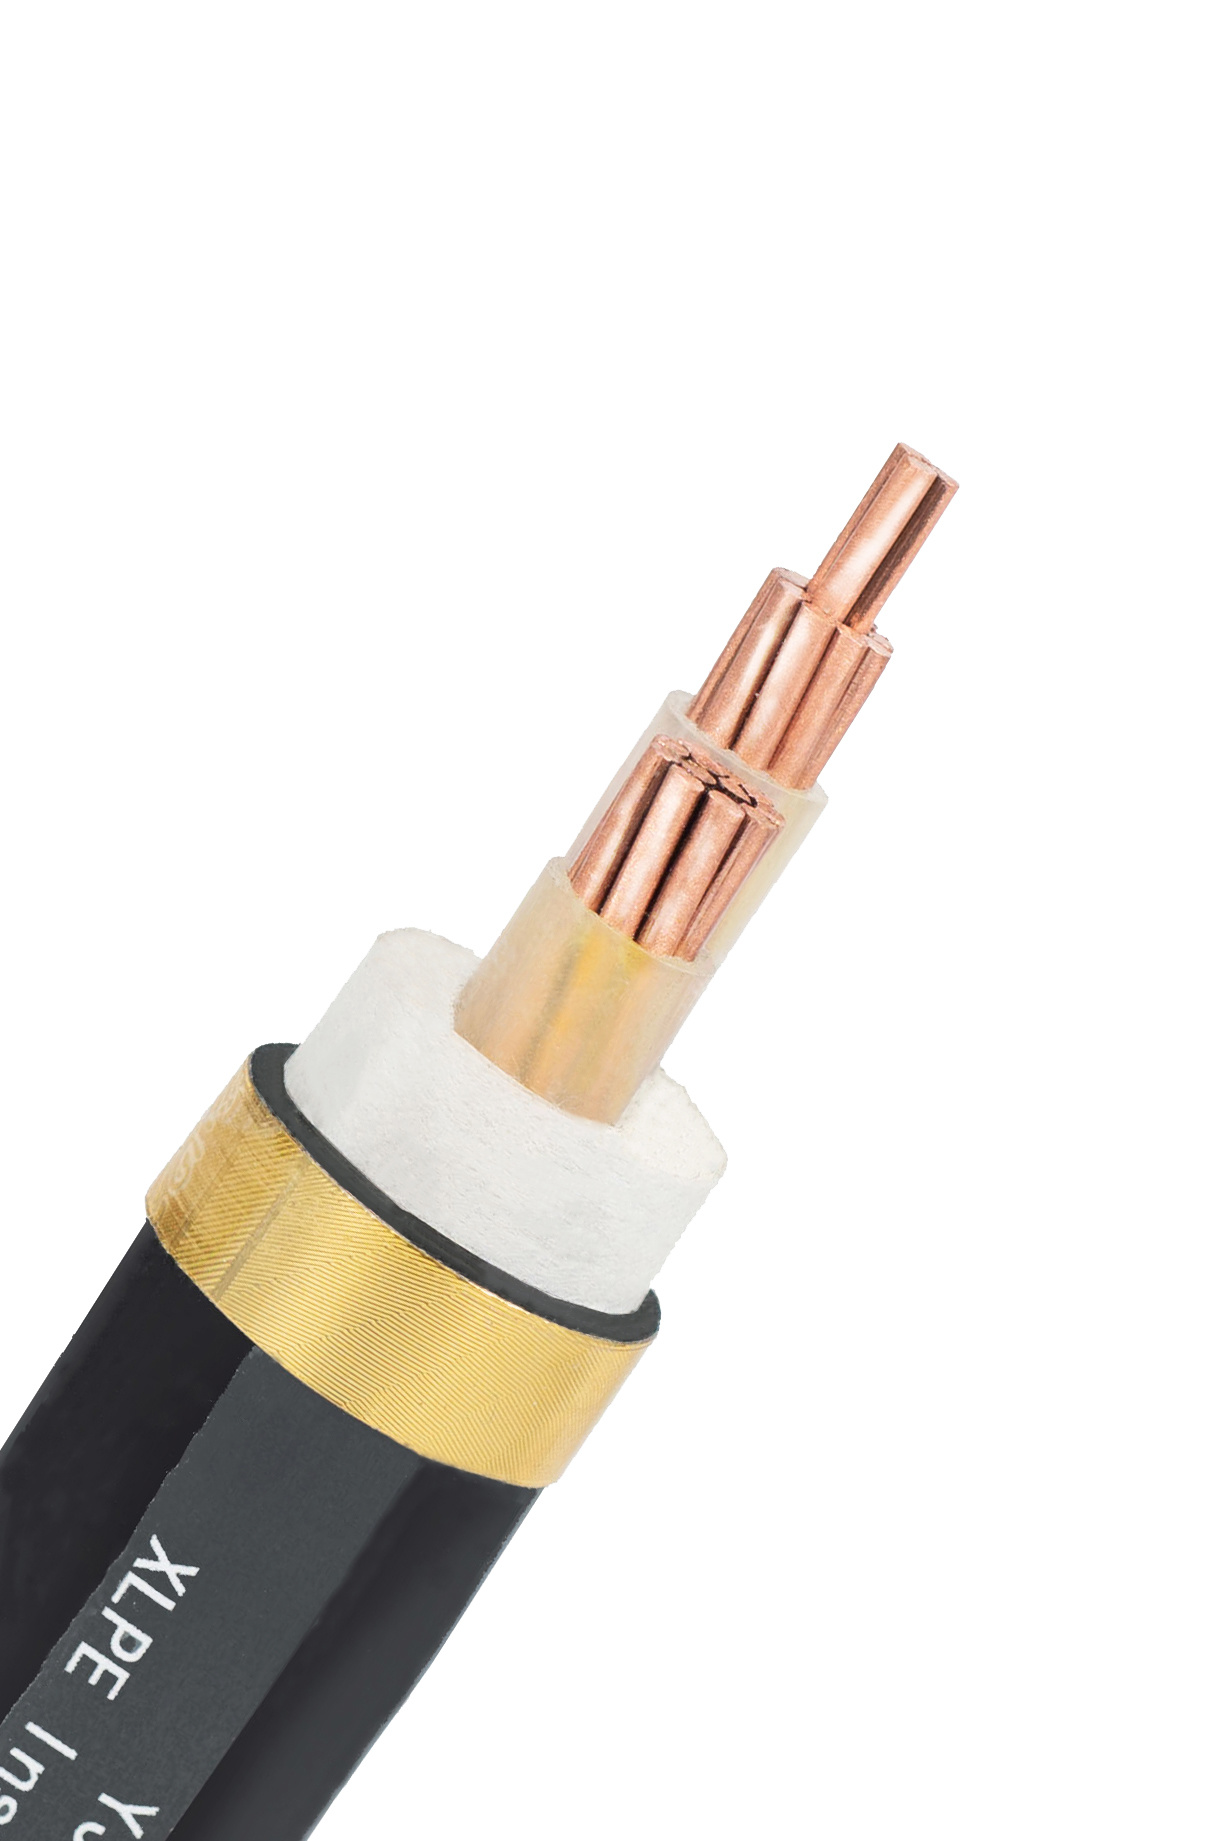 Kvvp22 Cable Multiple Control Cables, Electrical Cable and Kvv Cable 4mm2 PVC Sheathed 450/750V Signal Transmission Armored